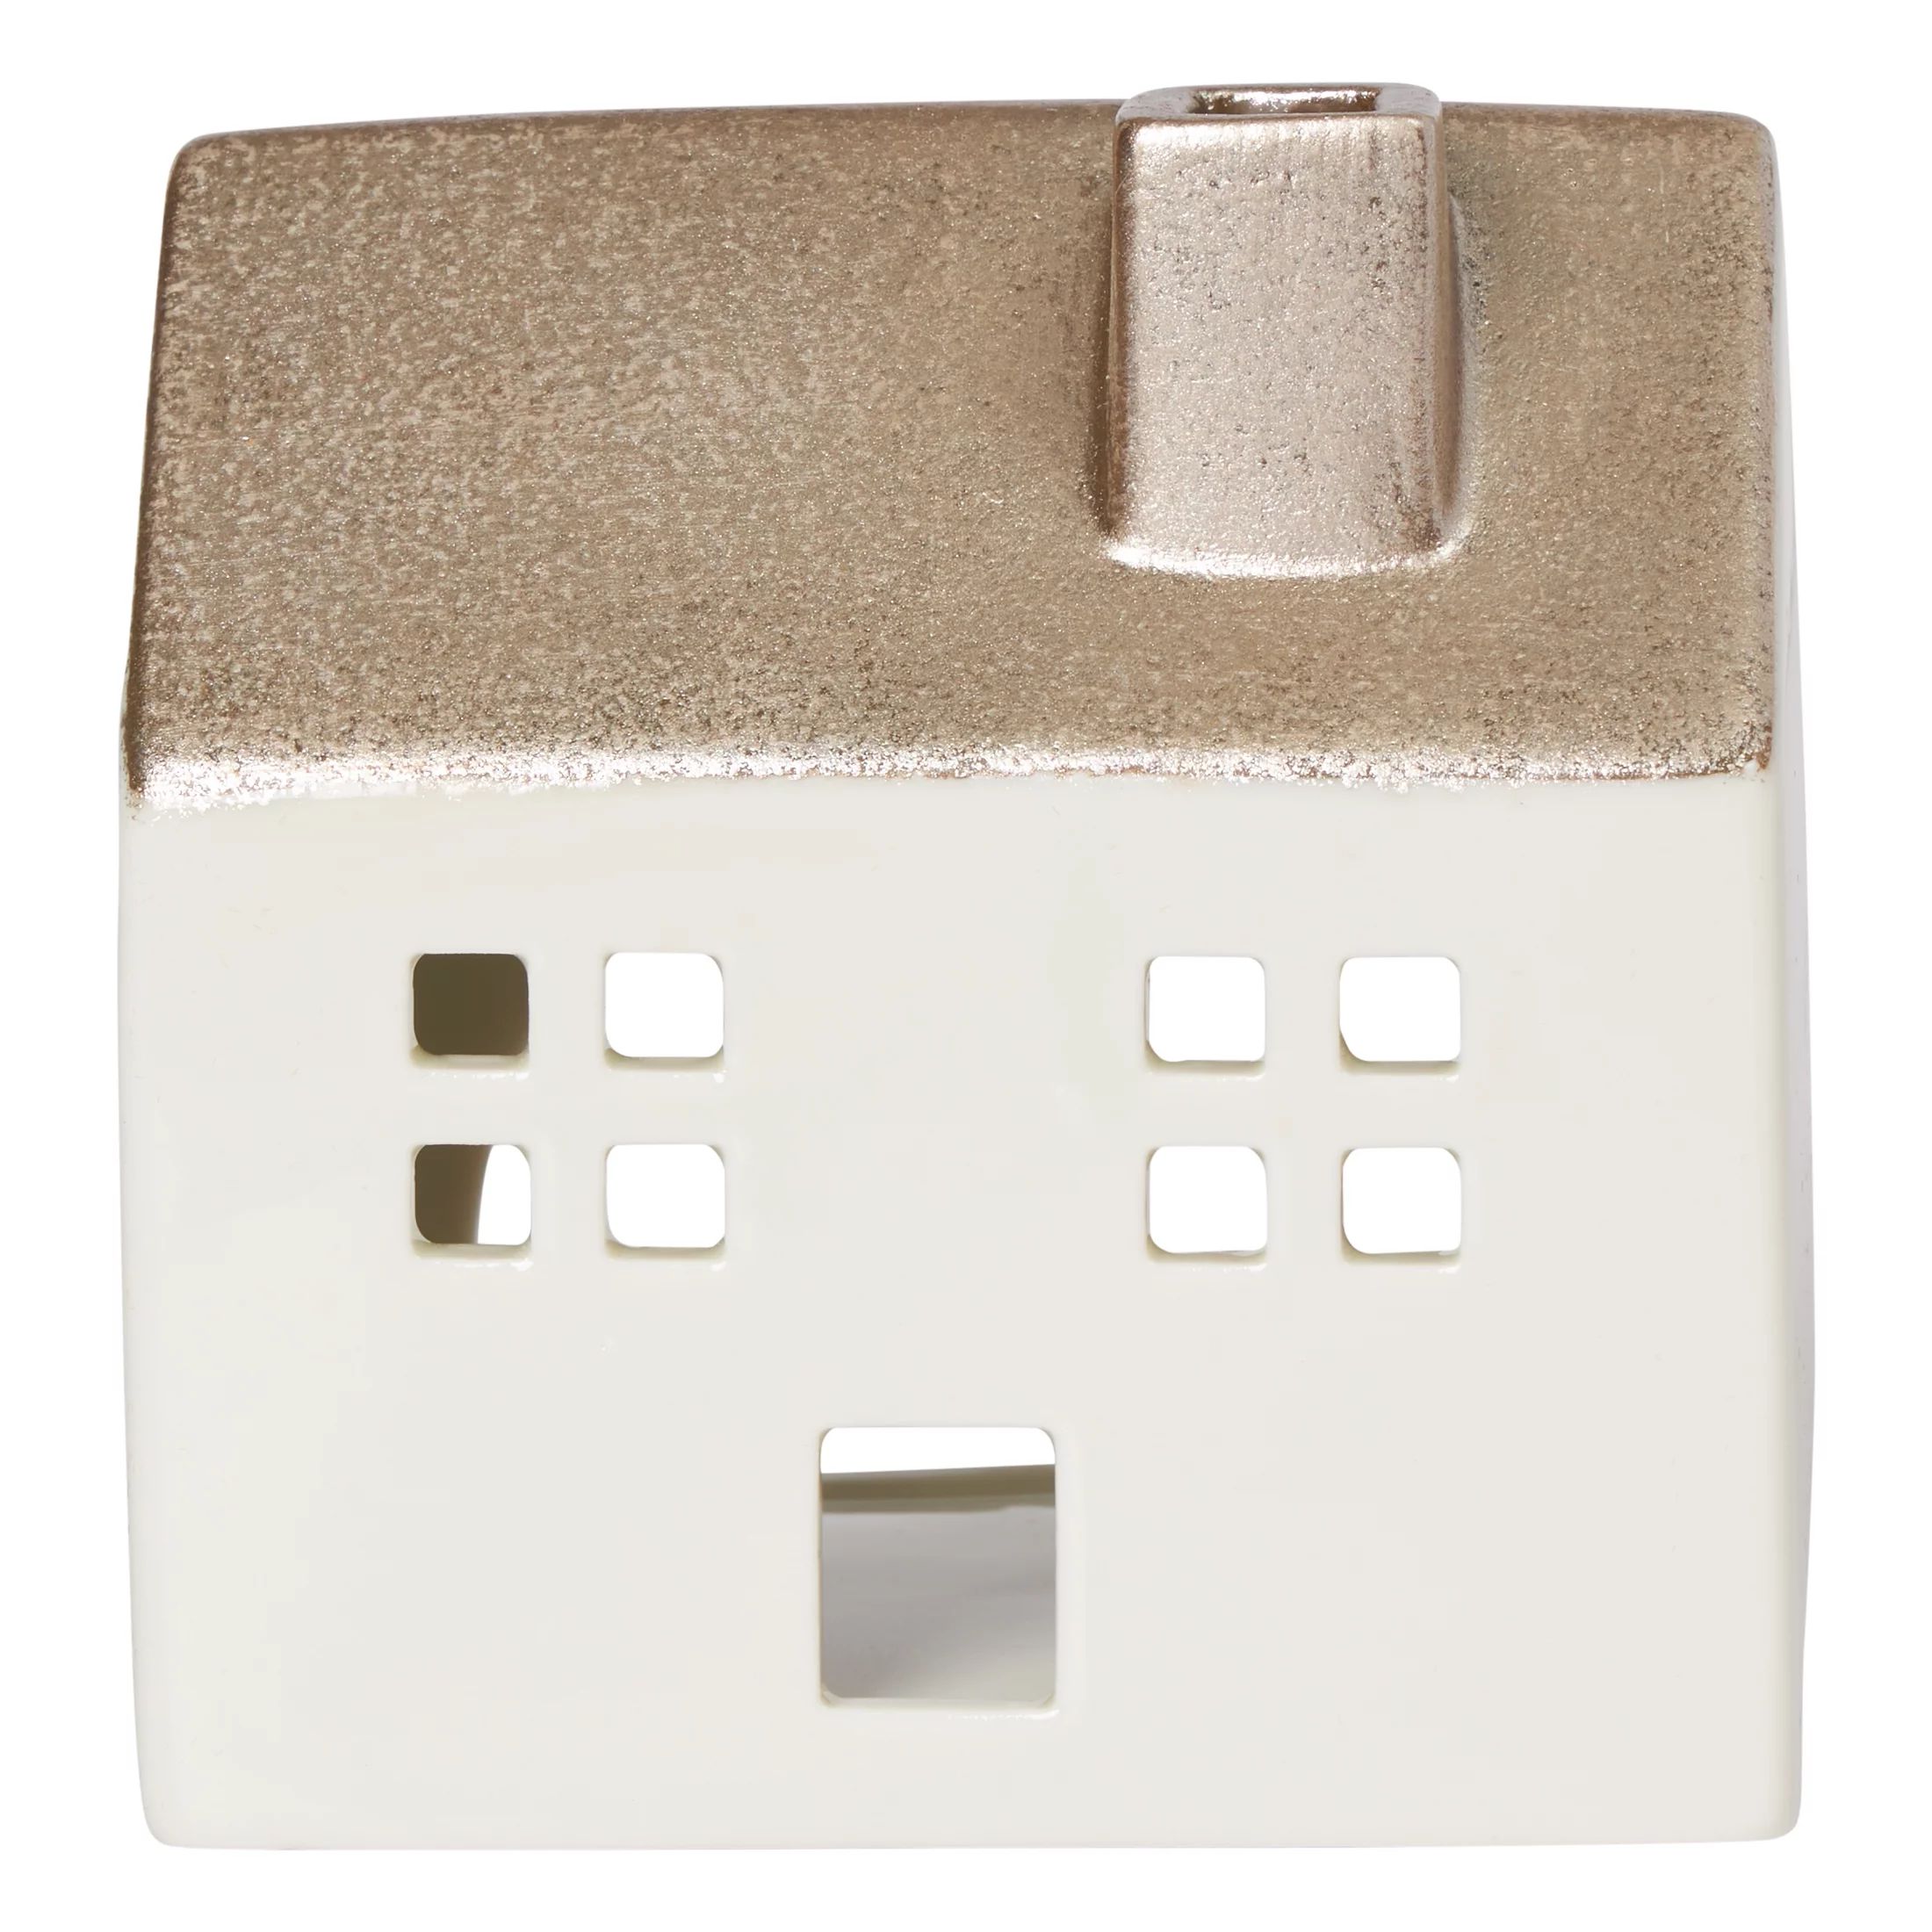 My Texas House My Texas House White Ceramic House, 4 inch (4.7)4.7 stars out of 17 reviews17 revi... | Walmart (US)